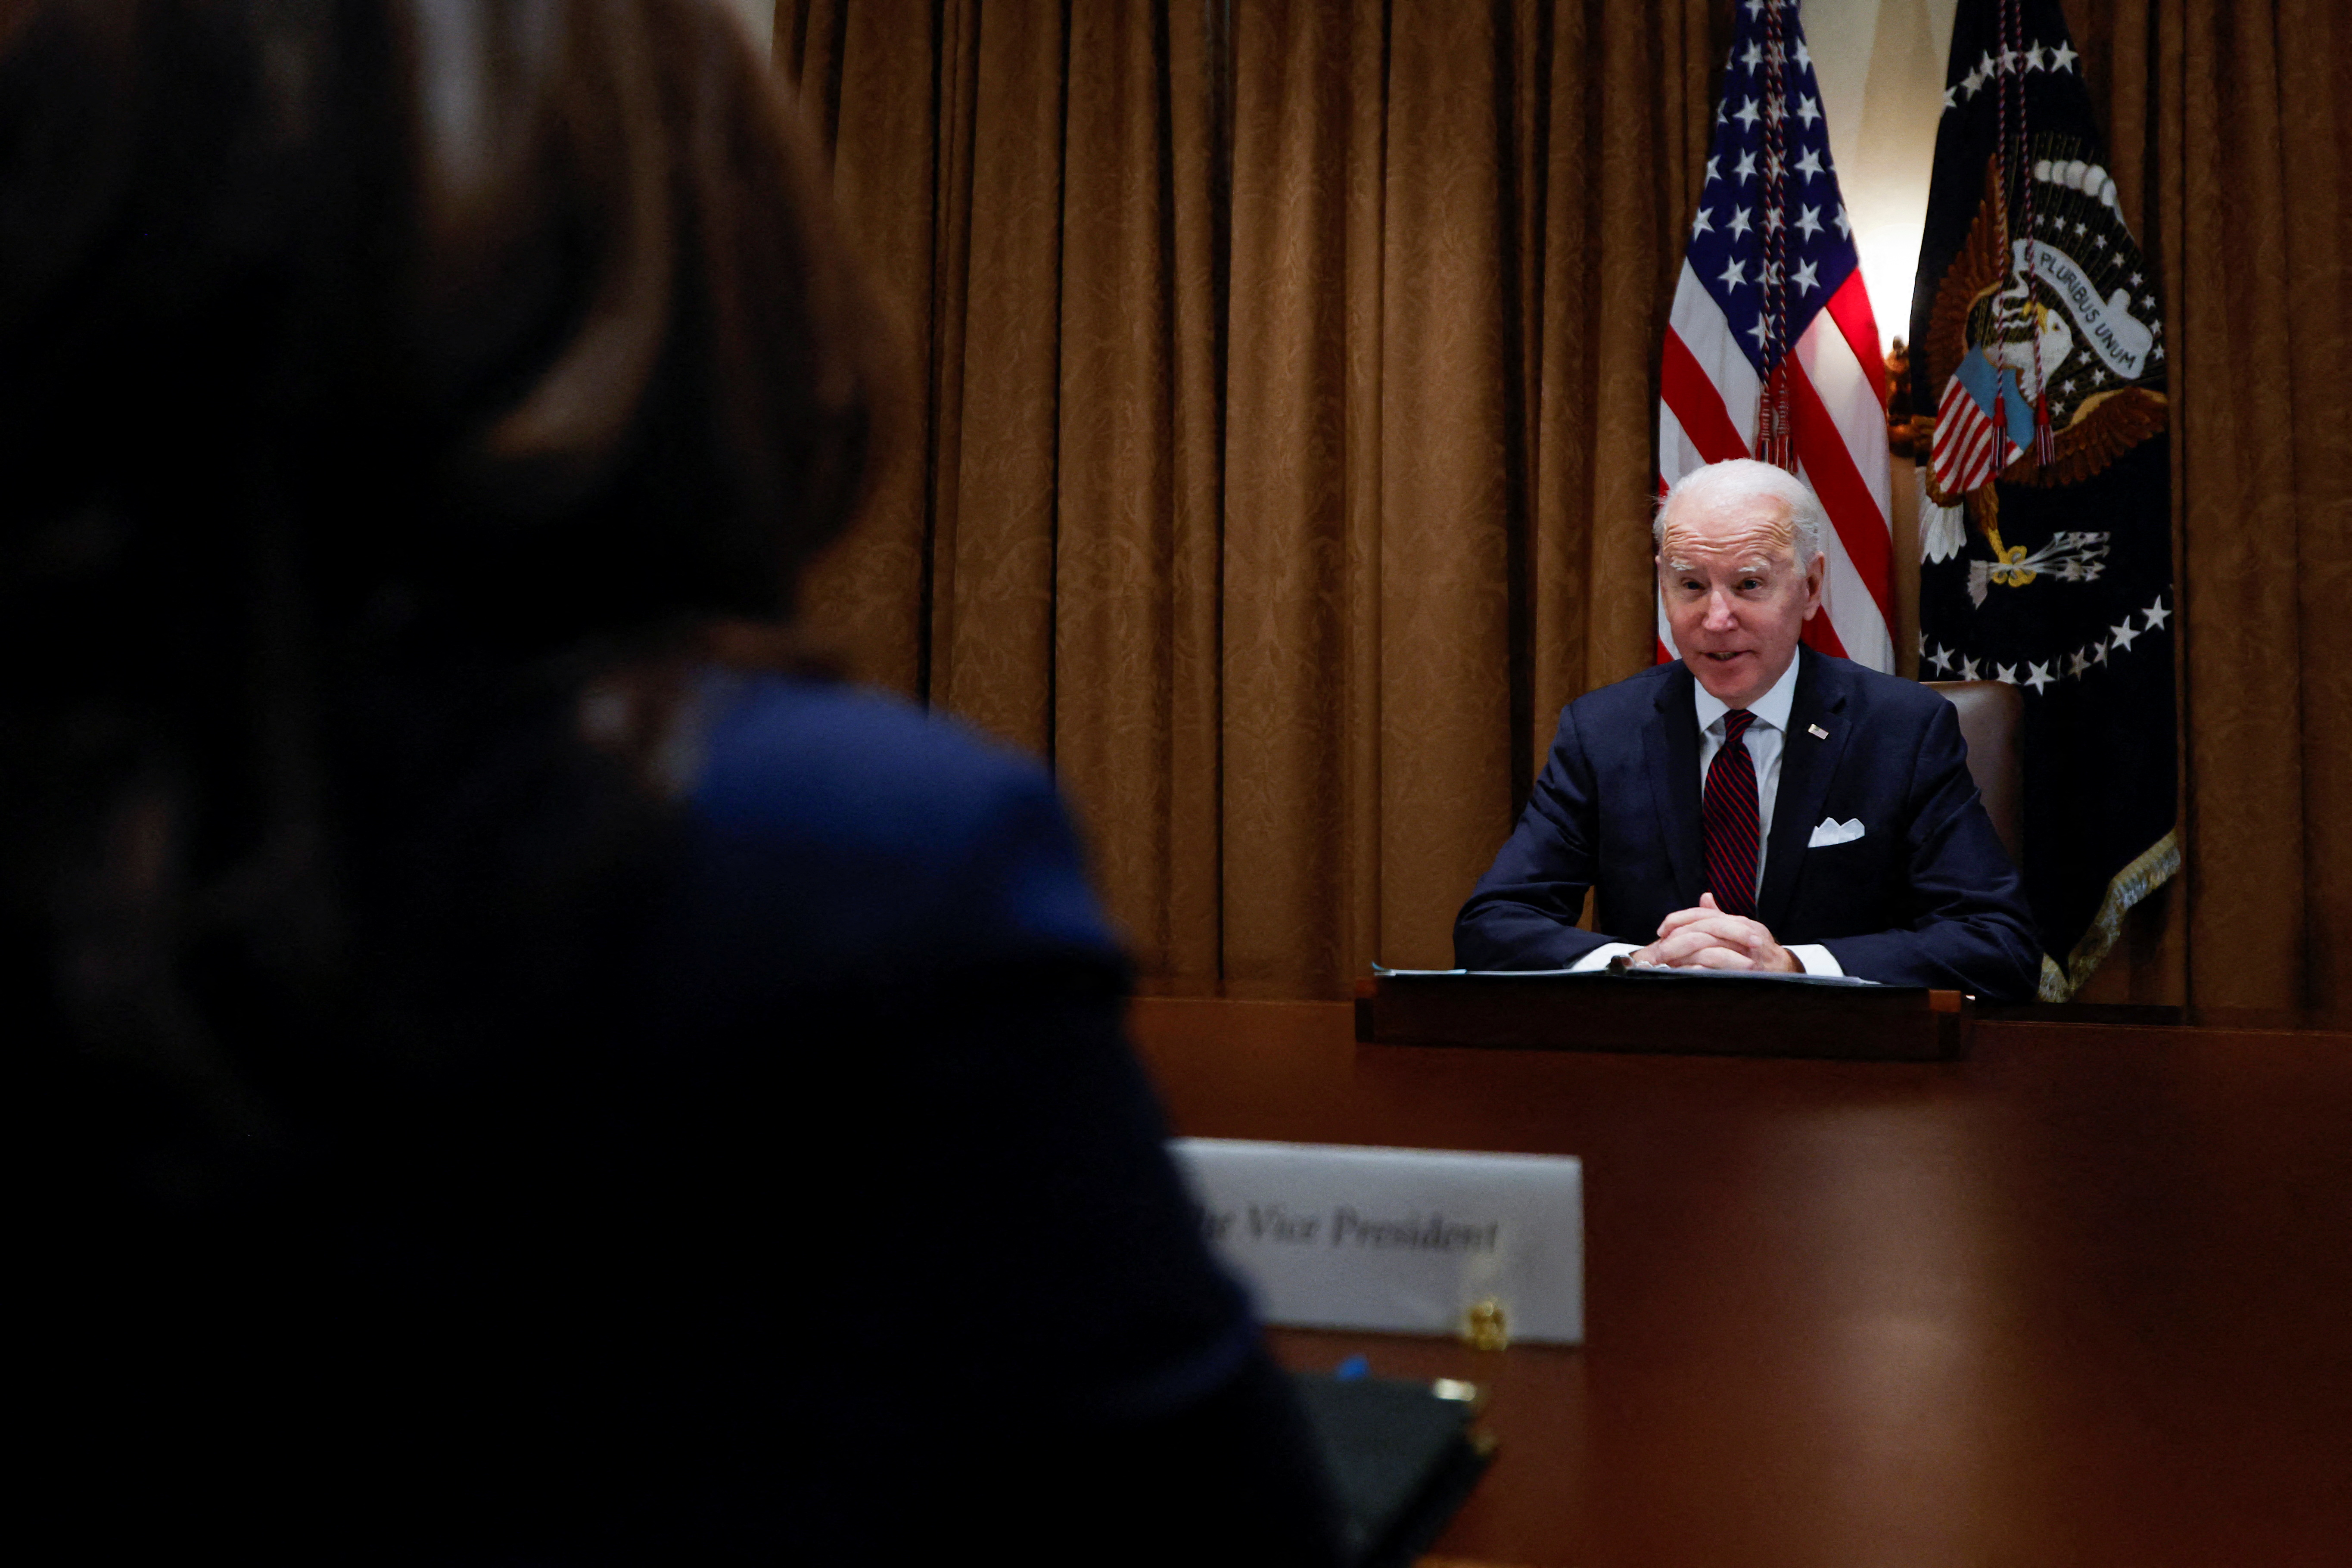 U.S. President Biden holds a meeting with his Infrastructure Implementation Task Force at the White House in Washington